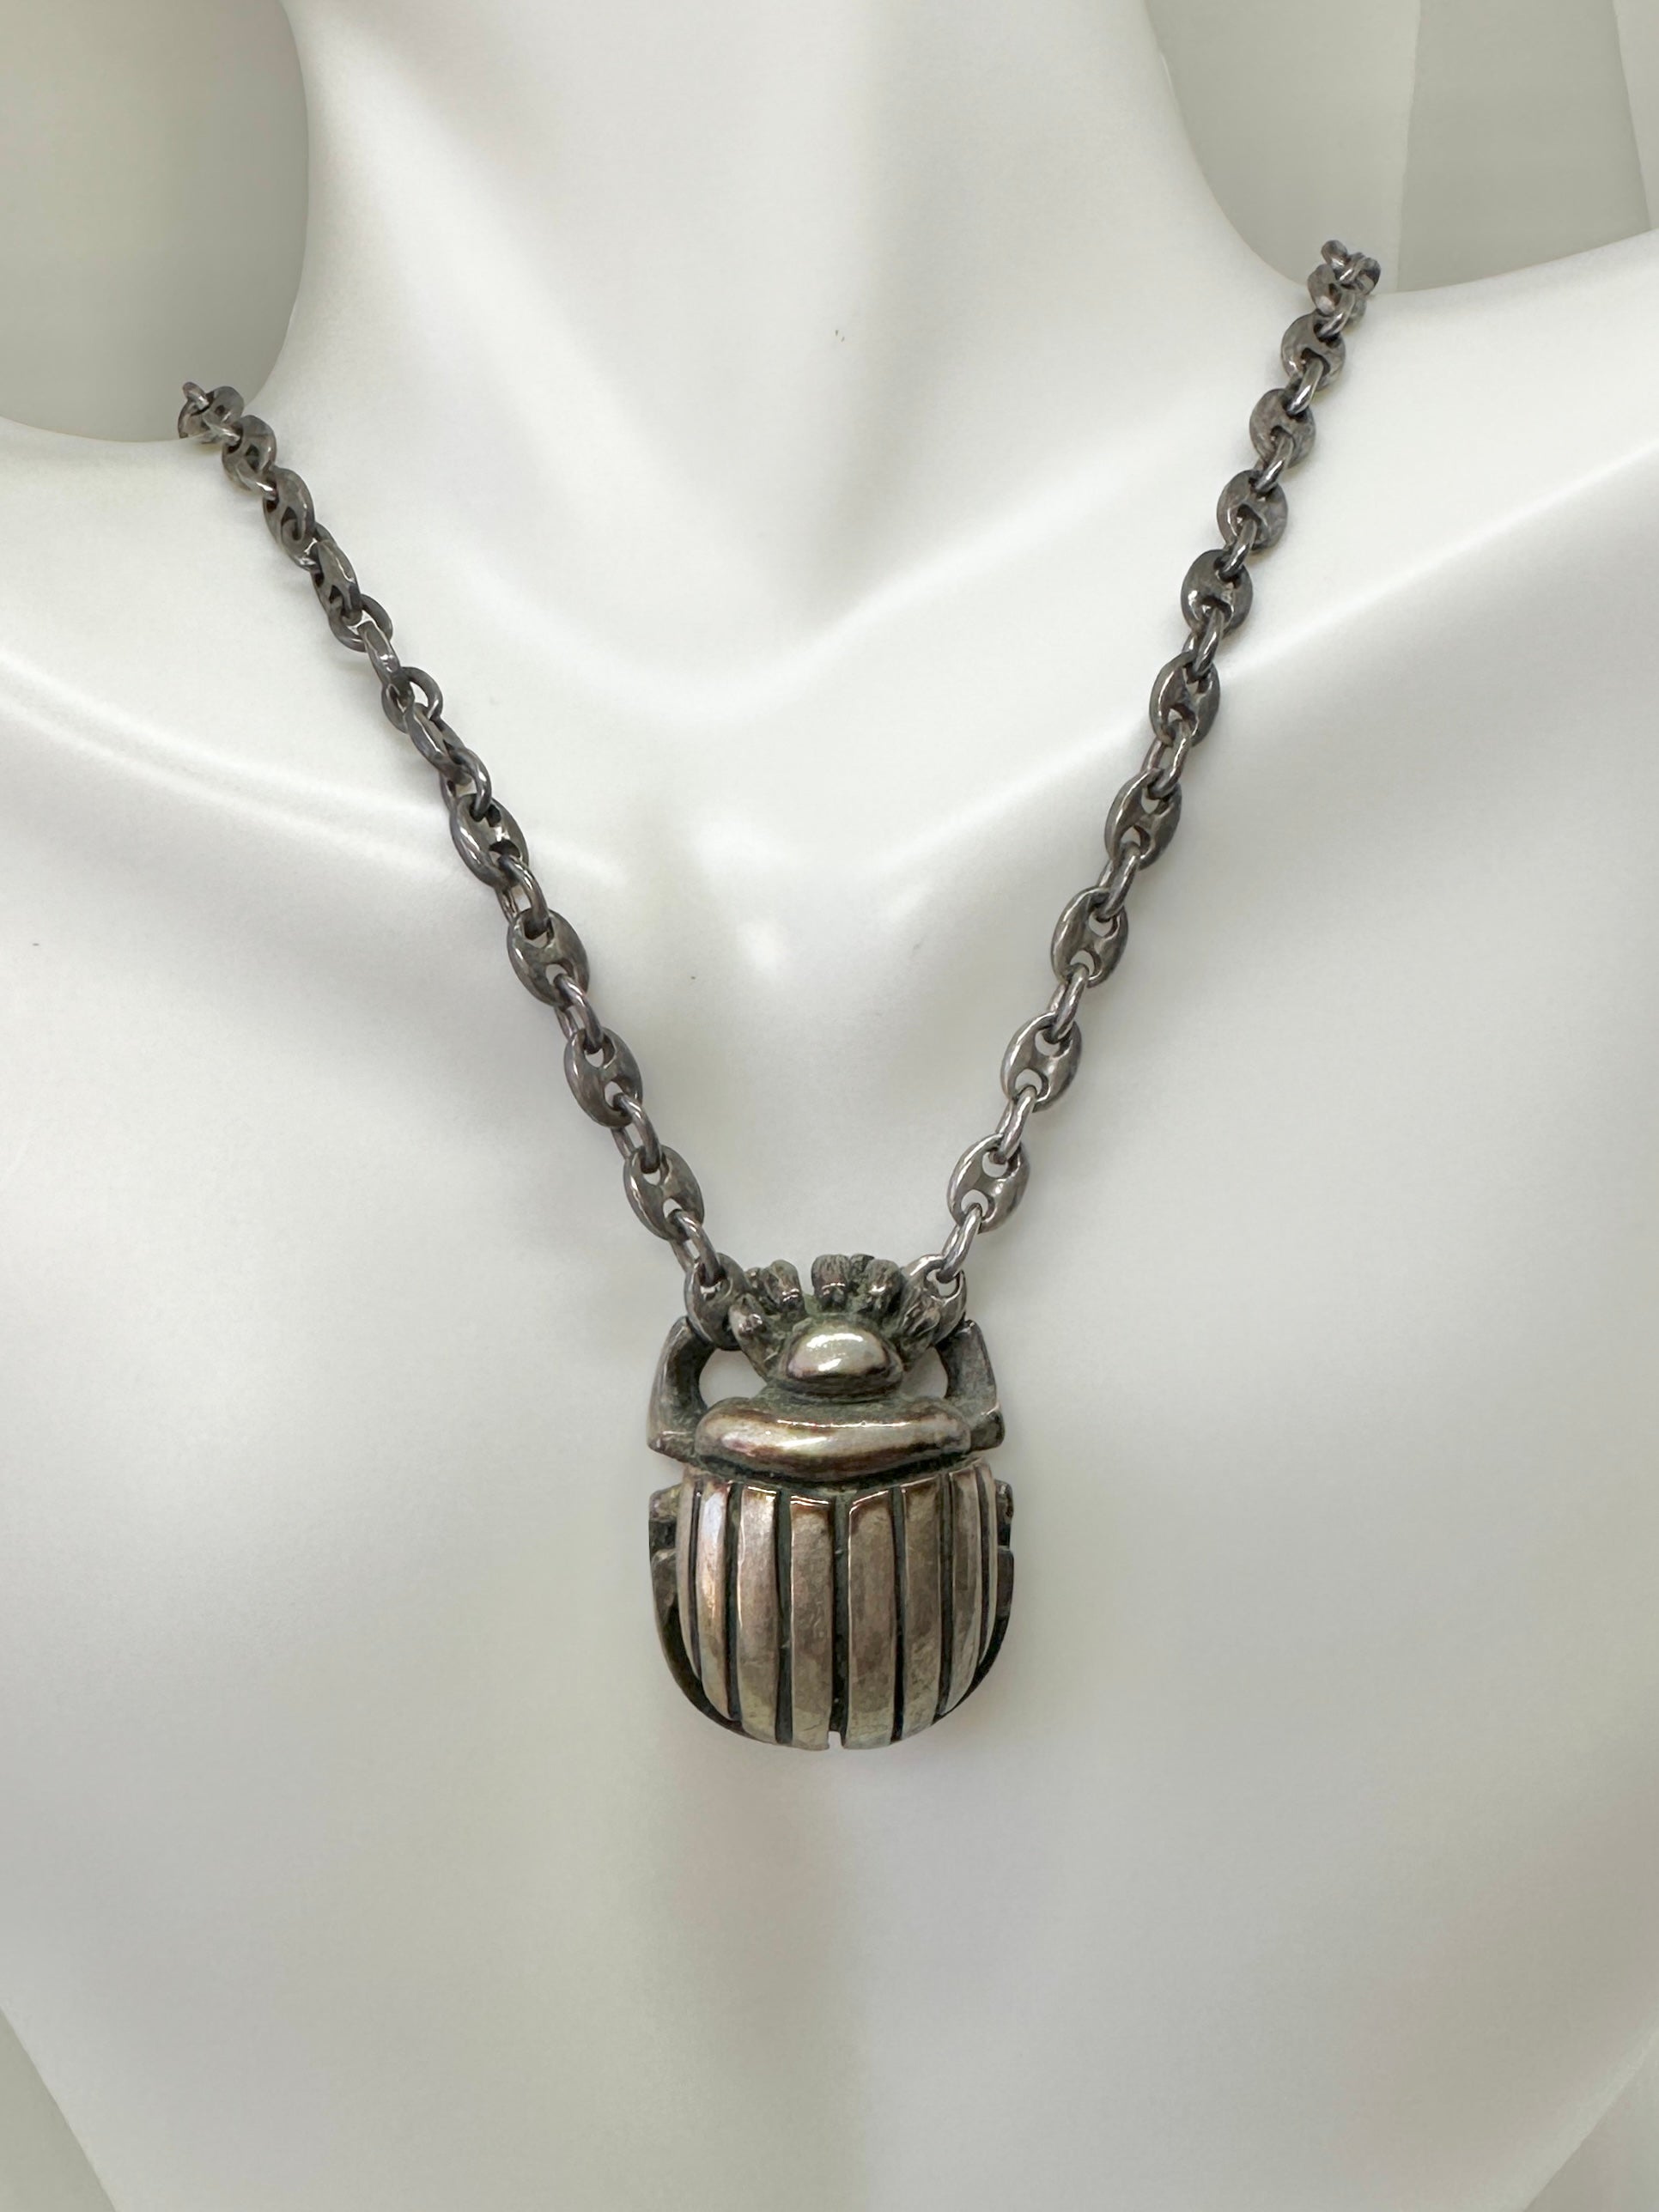 This is a very rare antique Art Deco Egyptian Revival Scarab Pendant Necklace in Sterling Silver with a stunning Link Chain.  The necklace is hallmarked Sterling JAR or JAD. The necklace is a heavy sterling silver and the substantial Scarab pendant